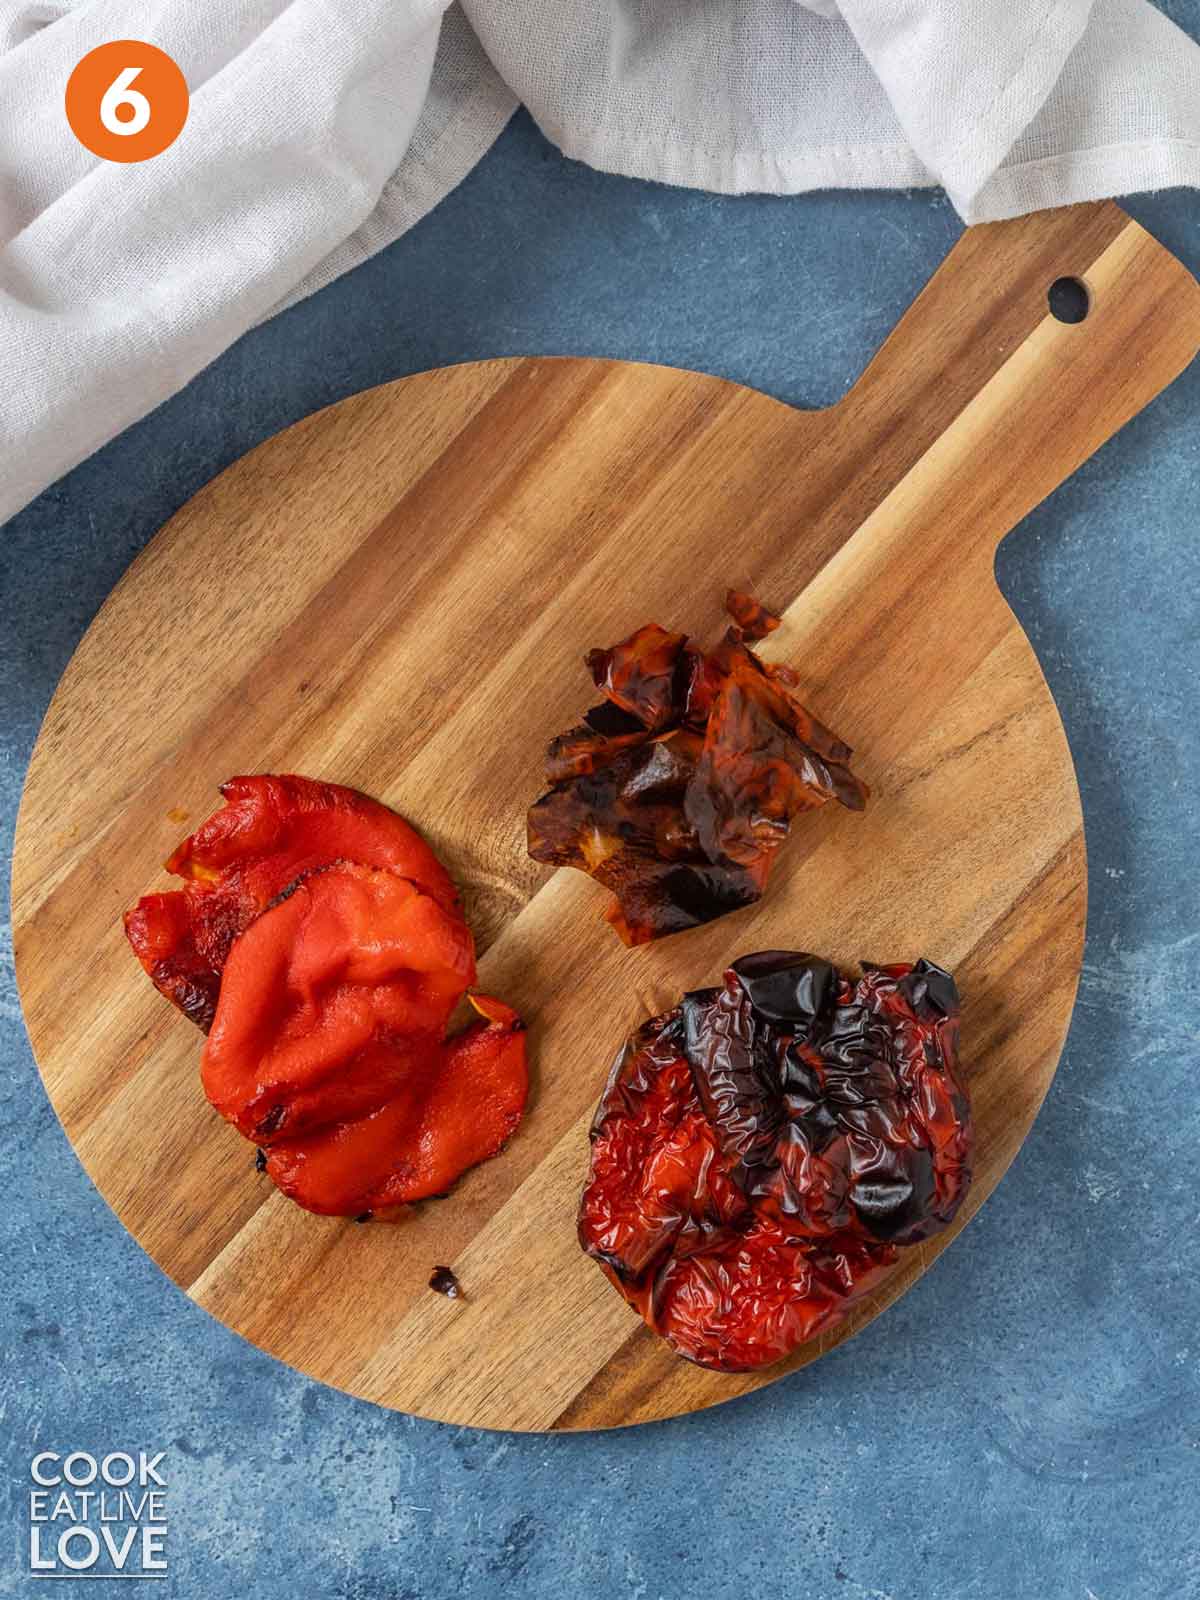 Skin peeled off the roasted red peppers.